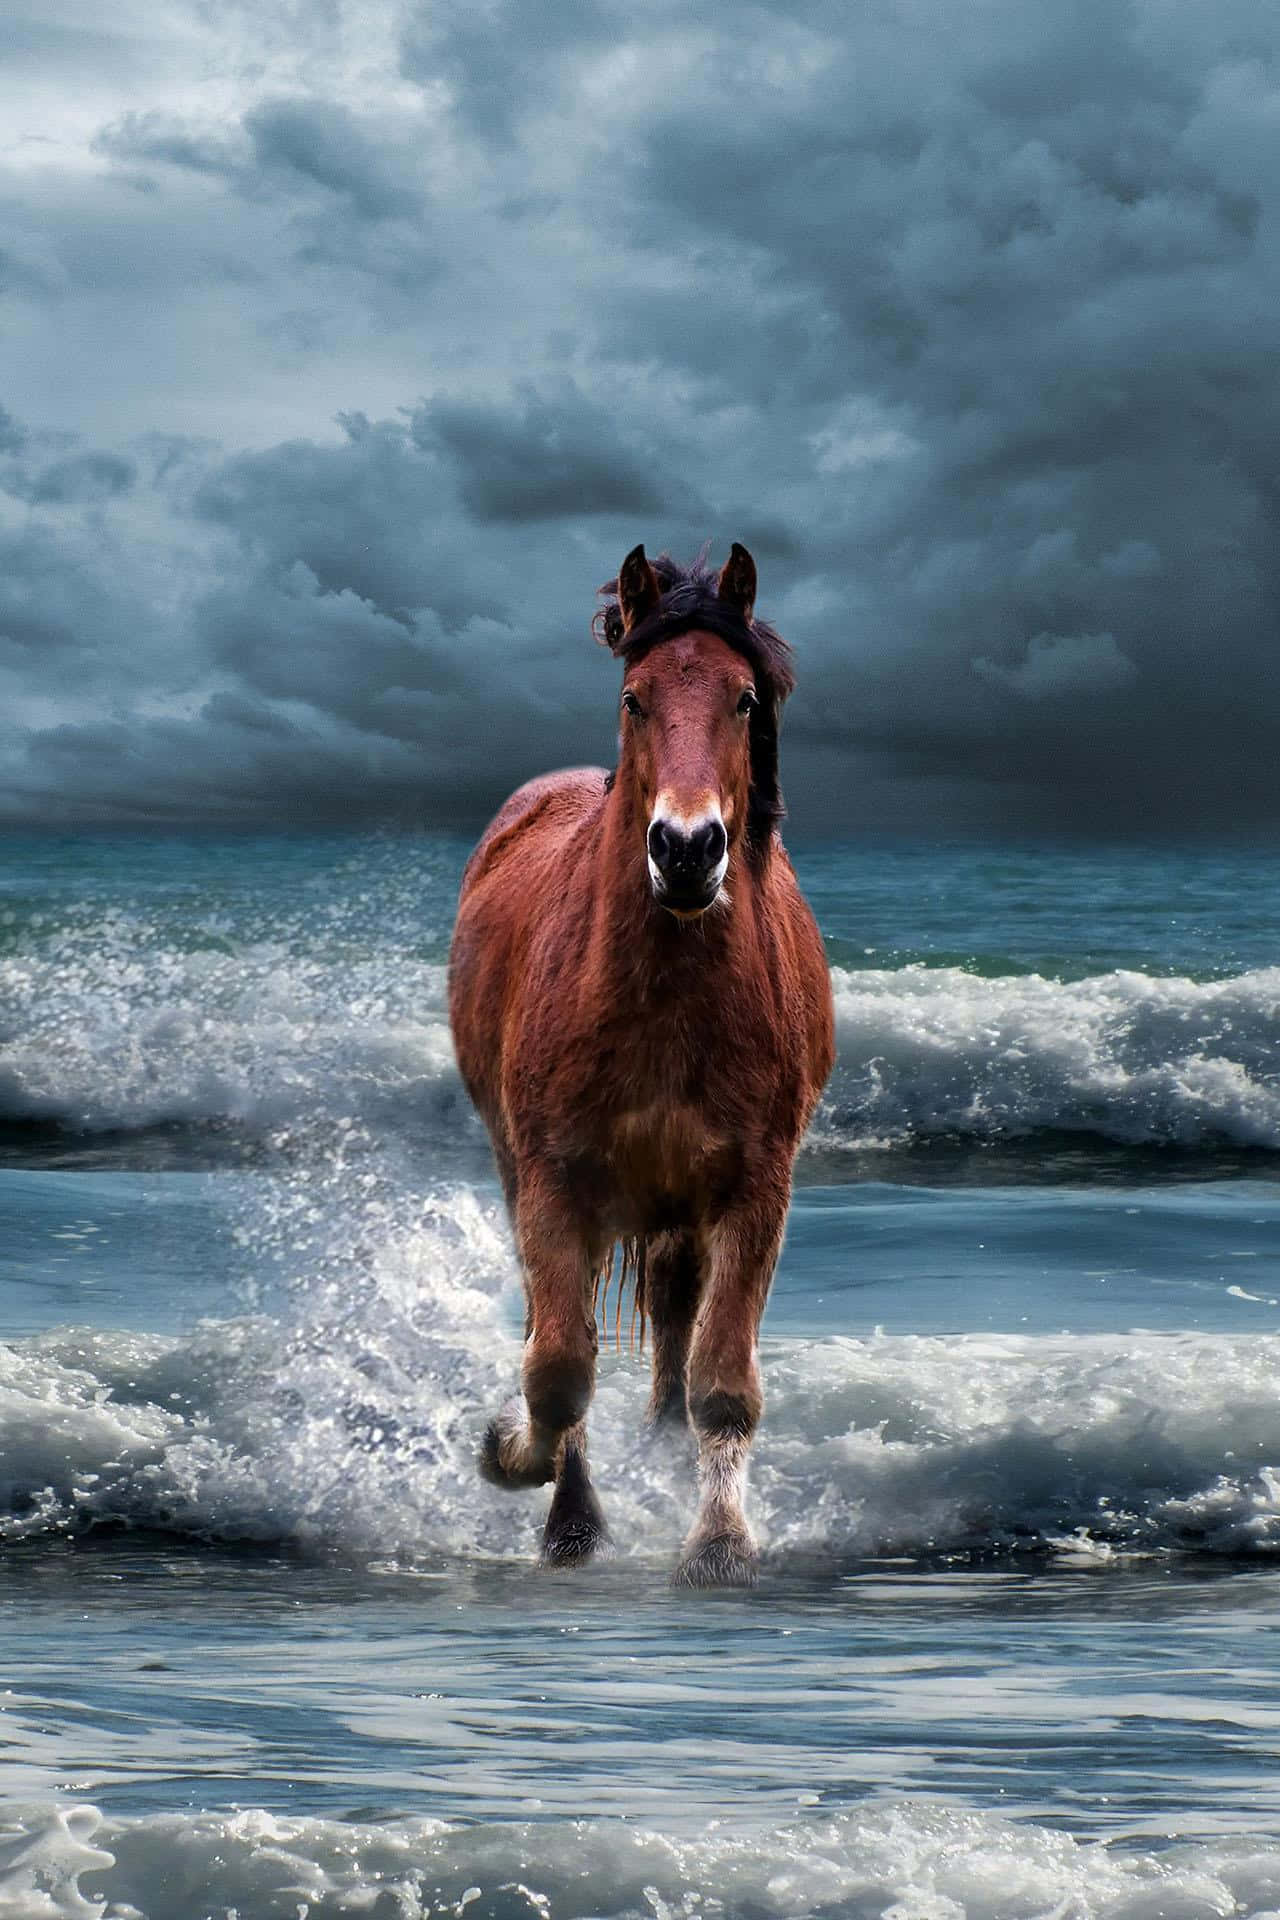 Majestic Horse Stormy Beach Galloping Wallpaper